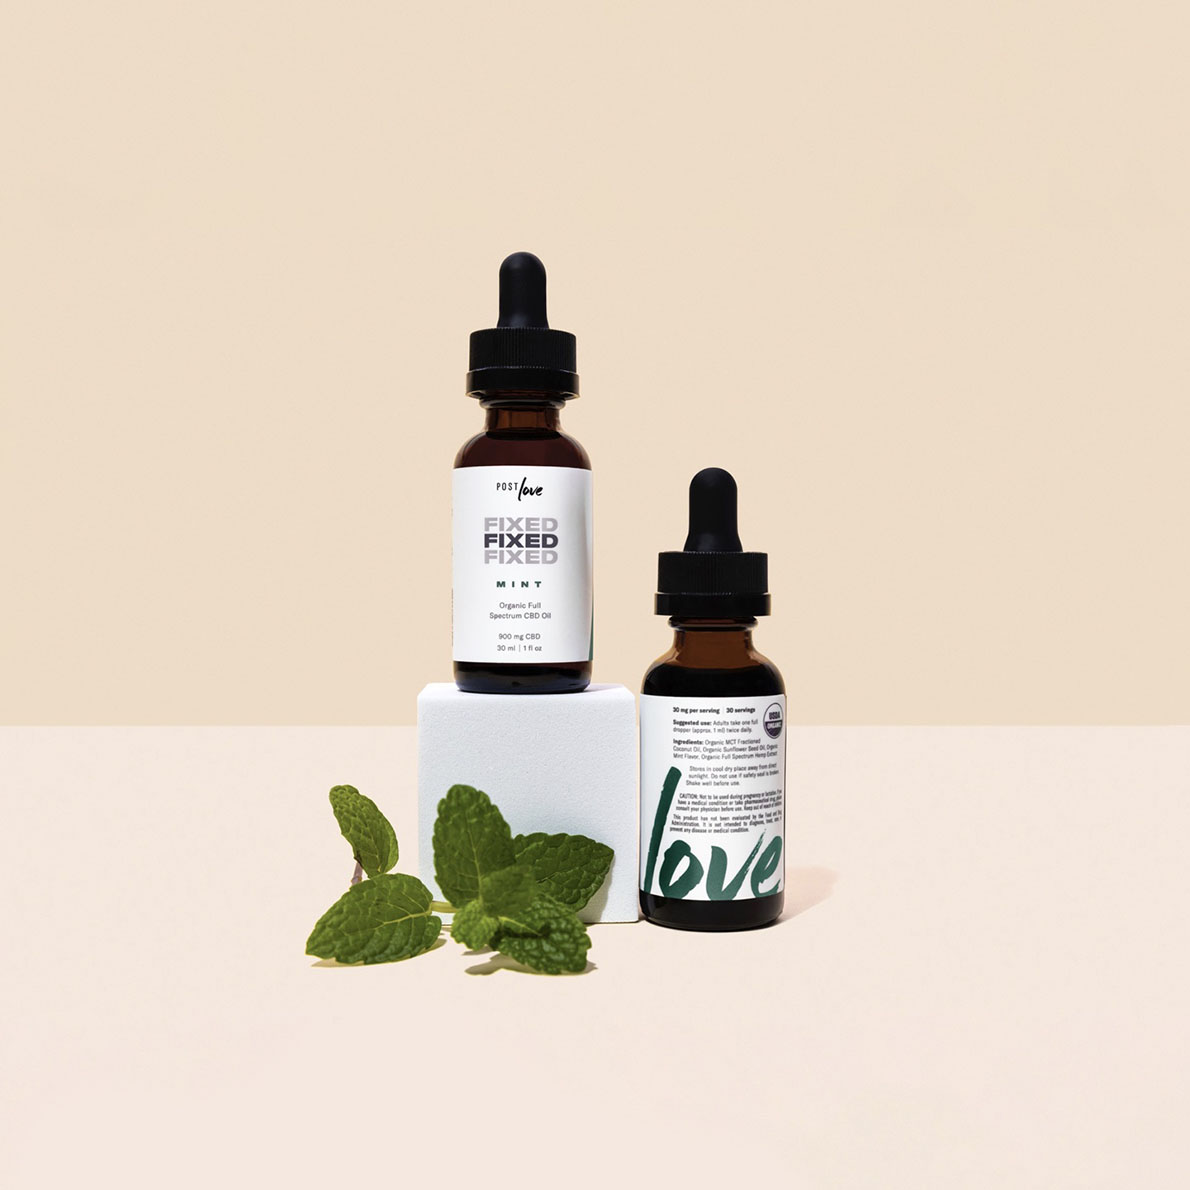 USDA Fixed mint serum by post love skin care